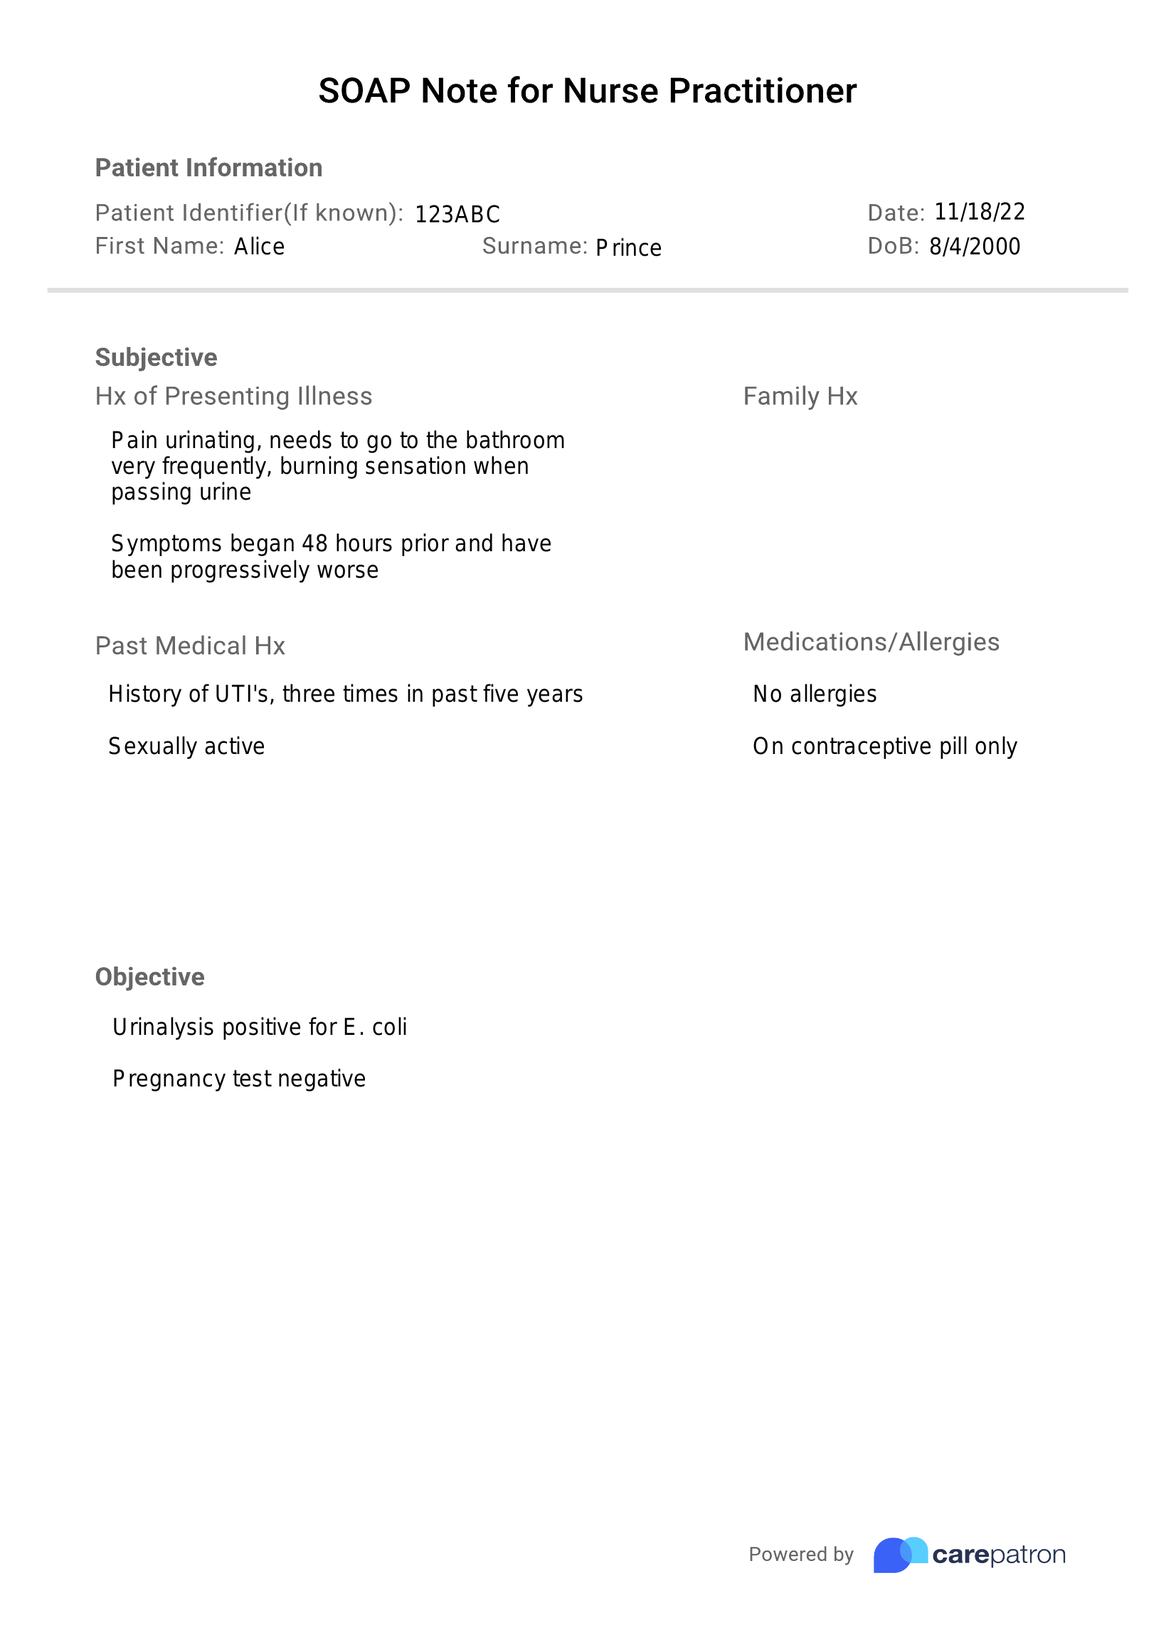 SOAP Notes for Nurse Practitioner Template PDF Example